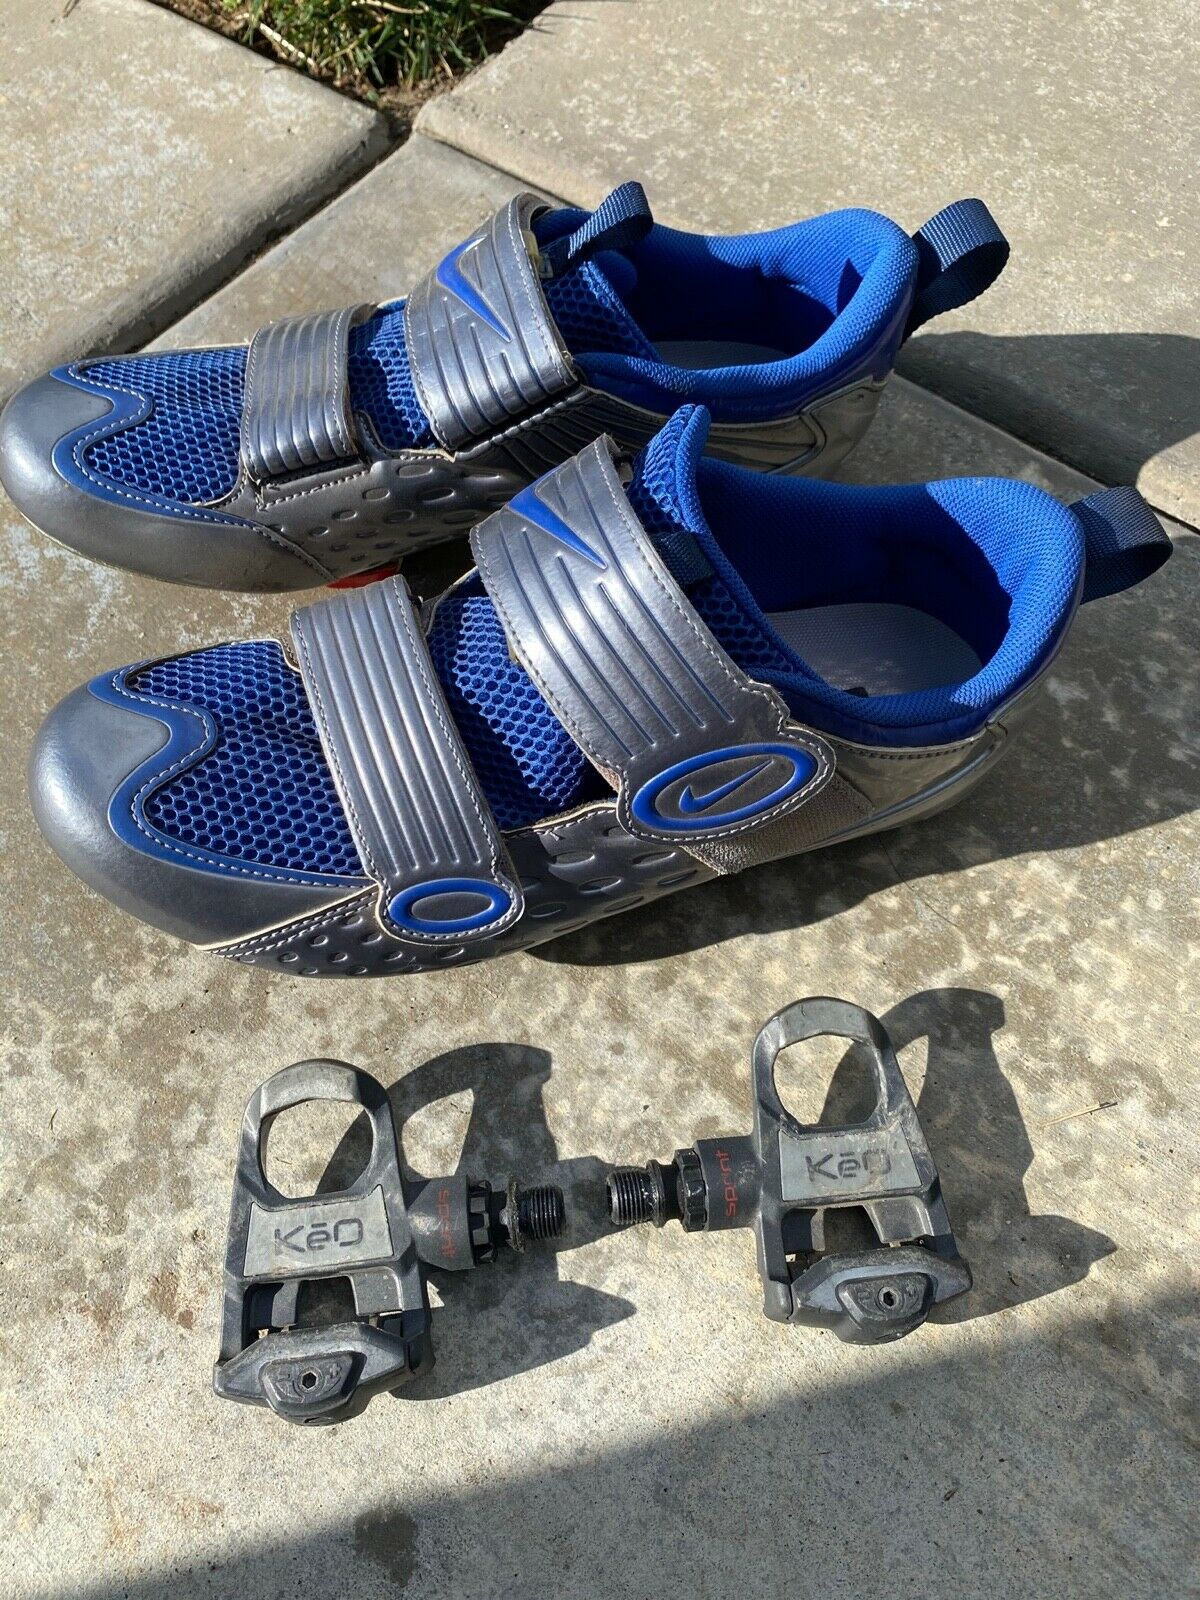 Nike Road Bike Shoes Carbon Sole With Keo Clip In Pedals And Cleats